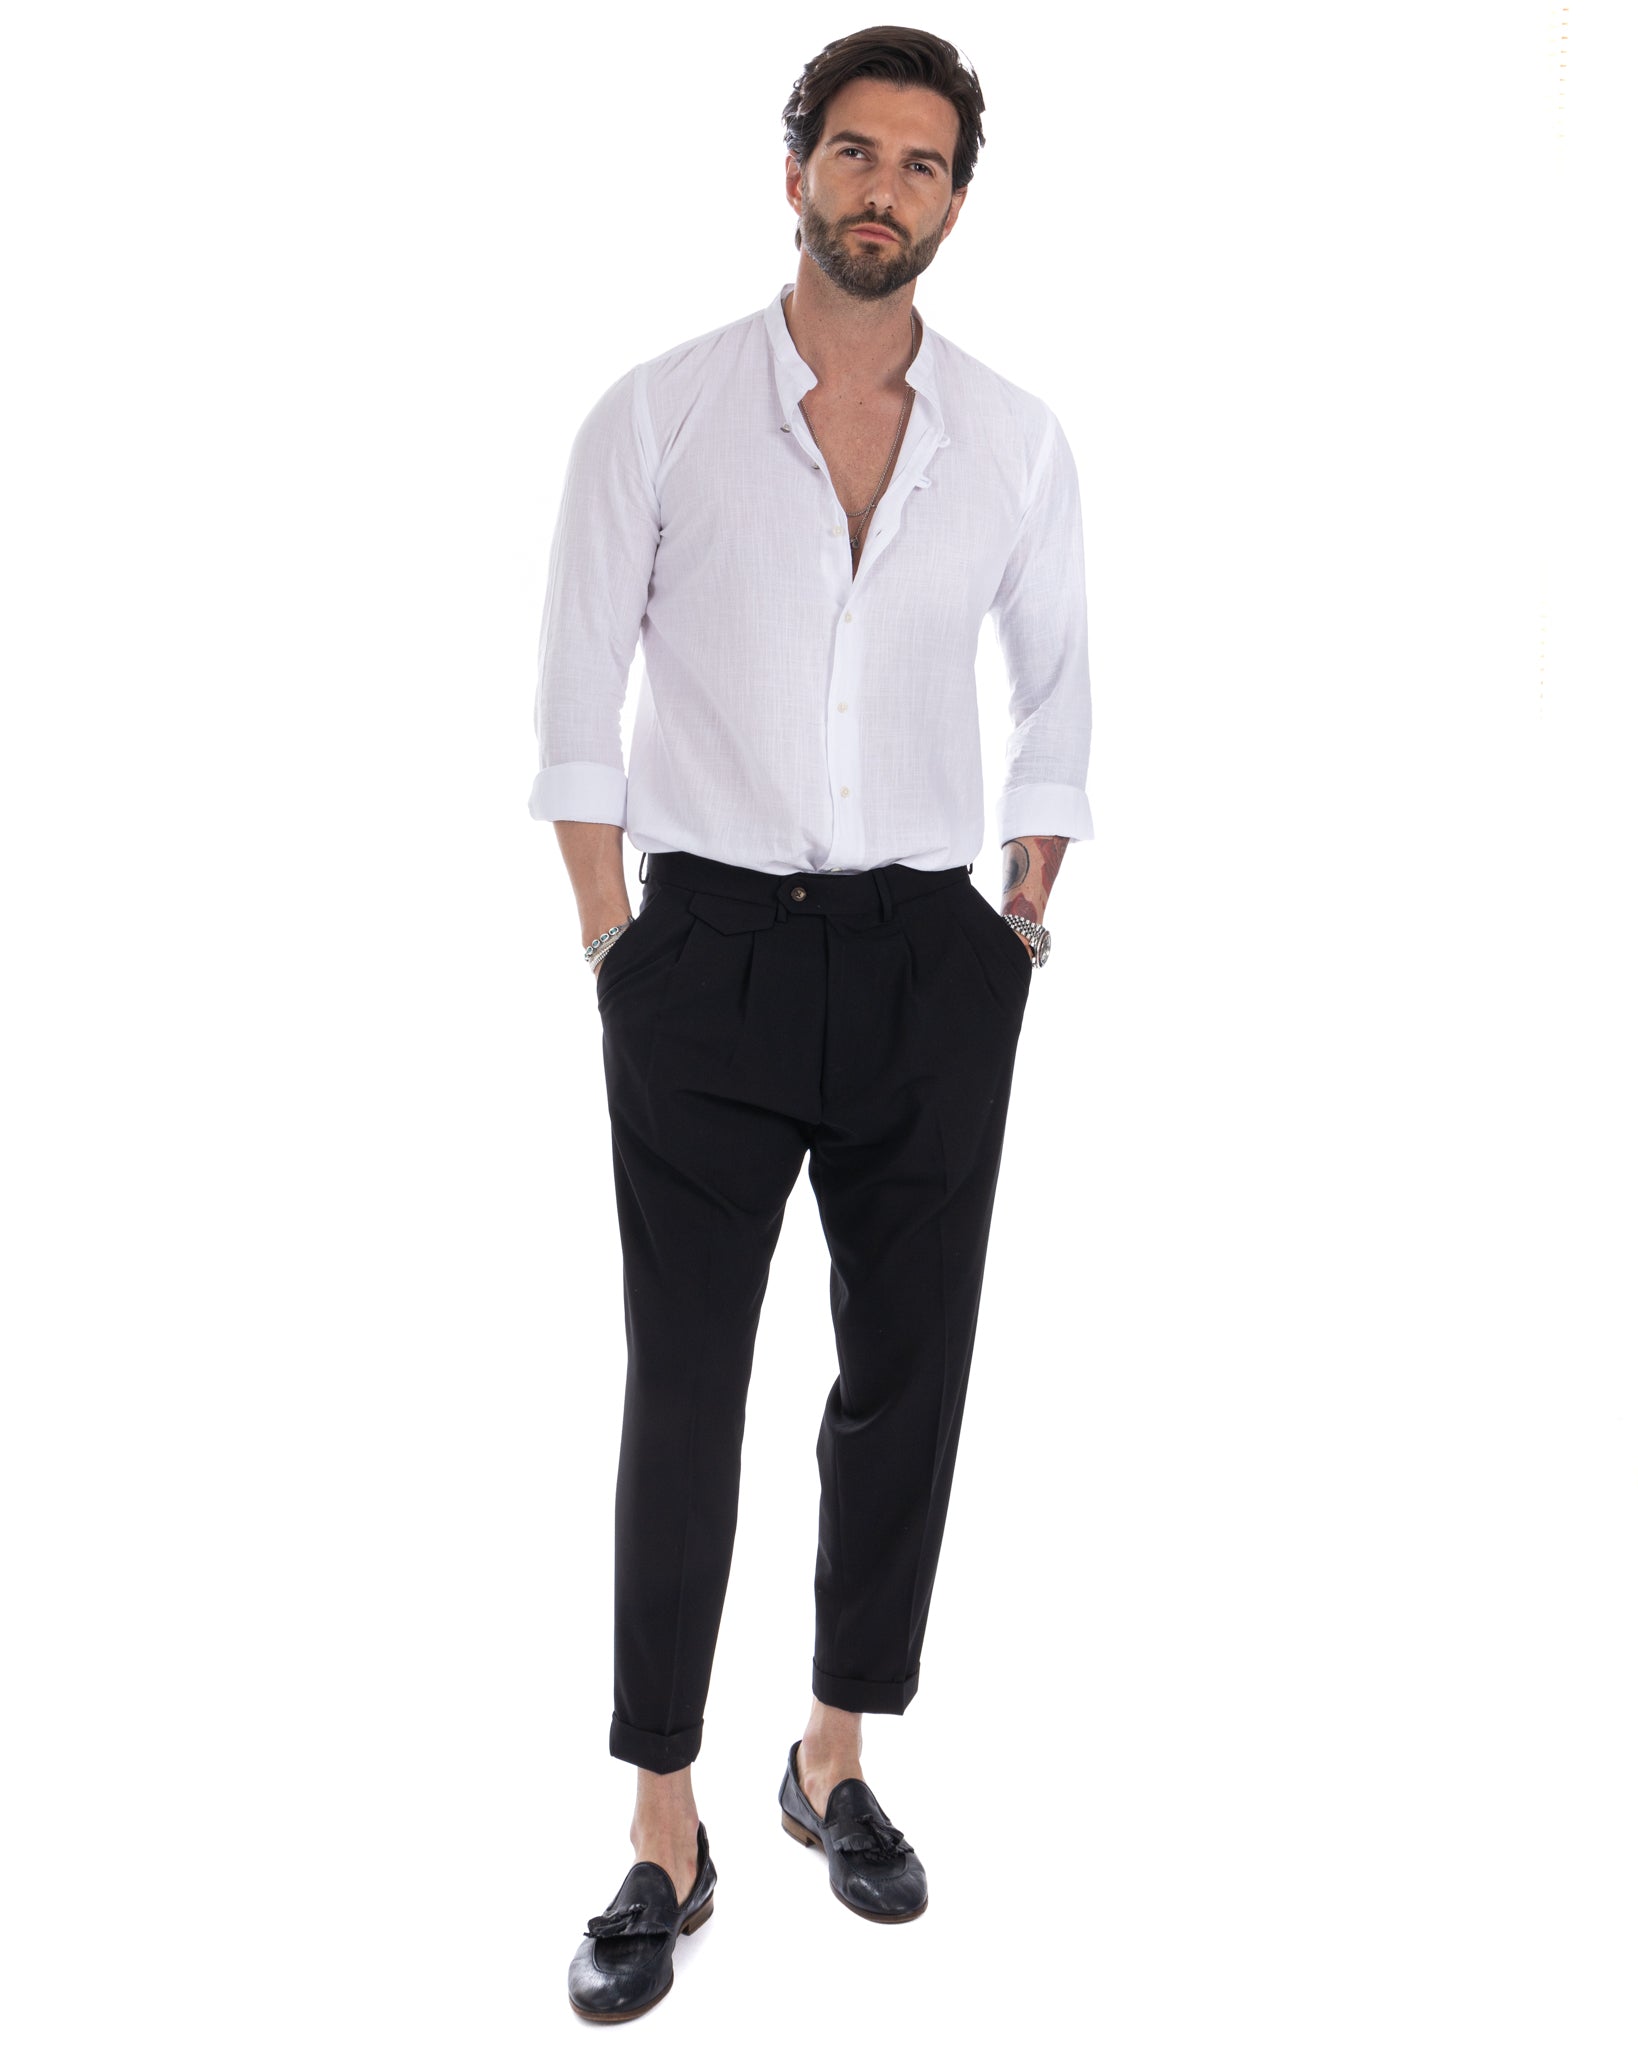 Taylor - black high waisted trousers